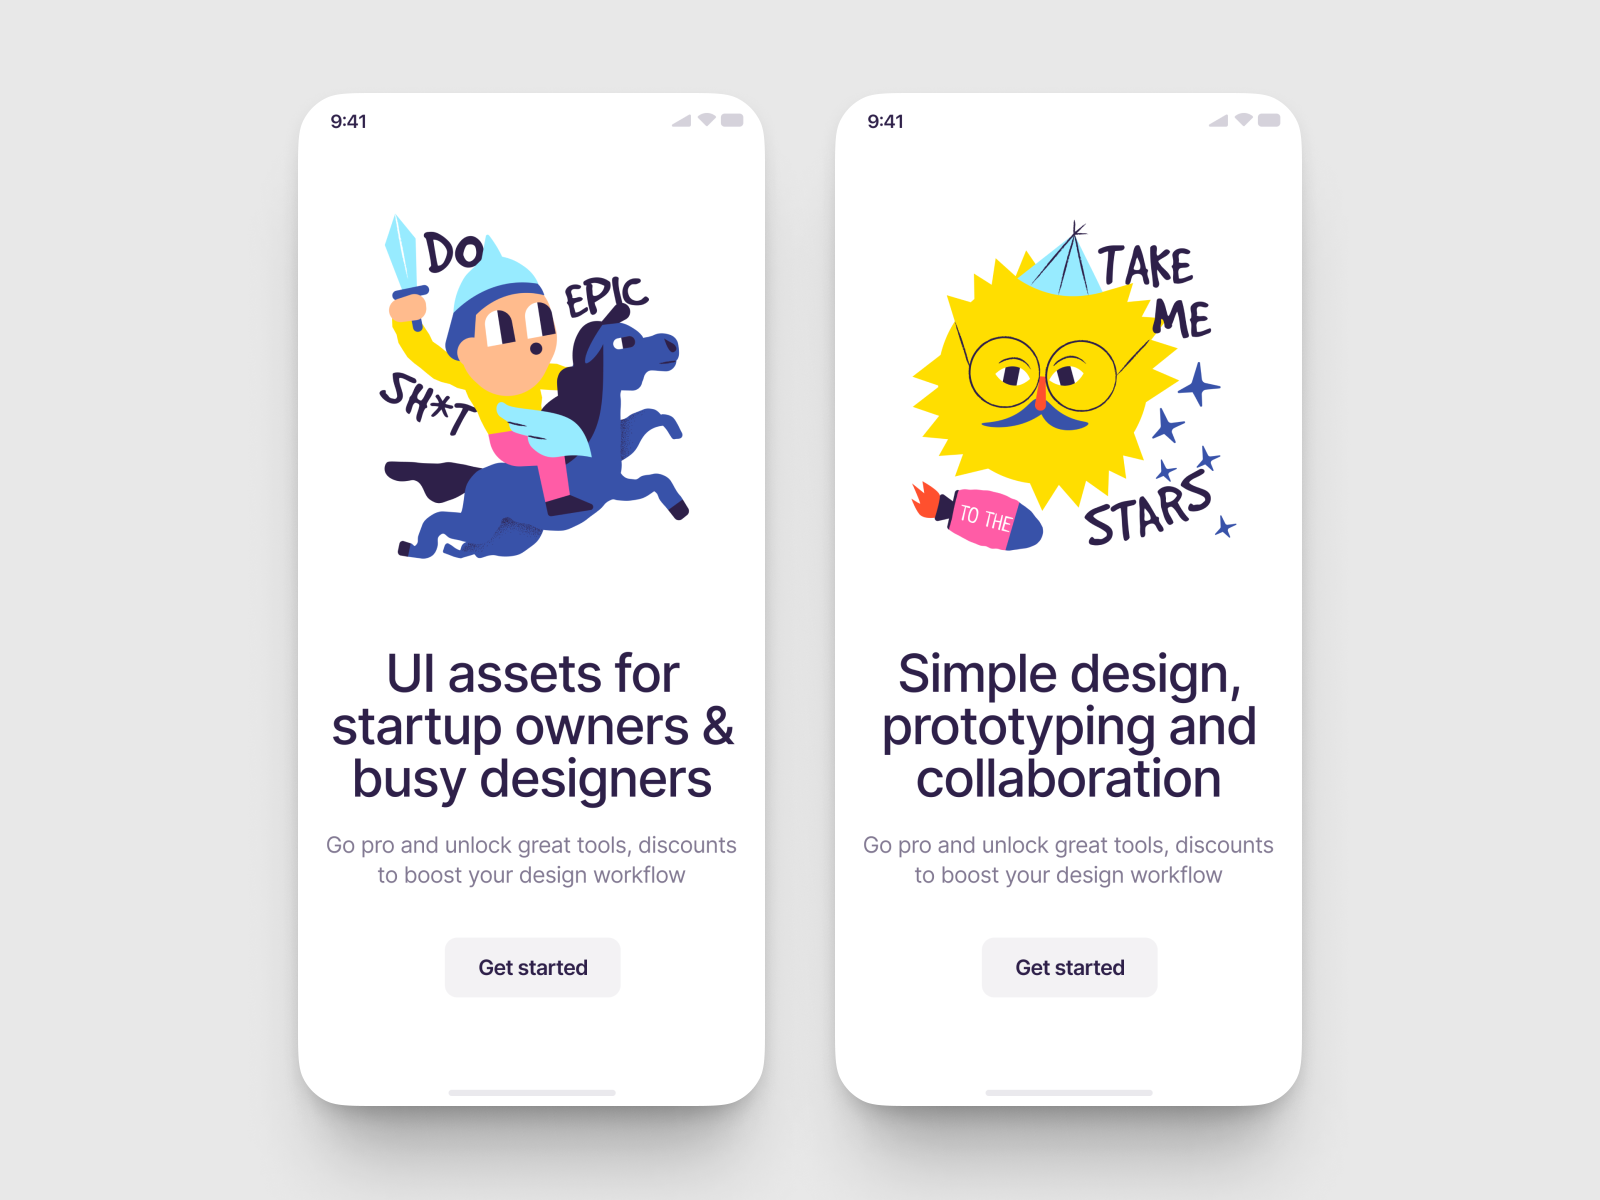 ui design showcase 2022 - Keep Going! by Storytale for Craftwork